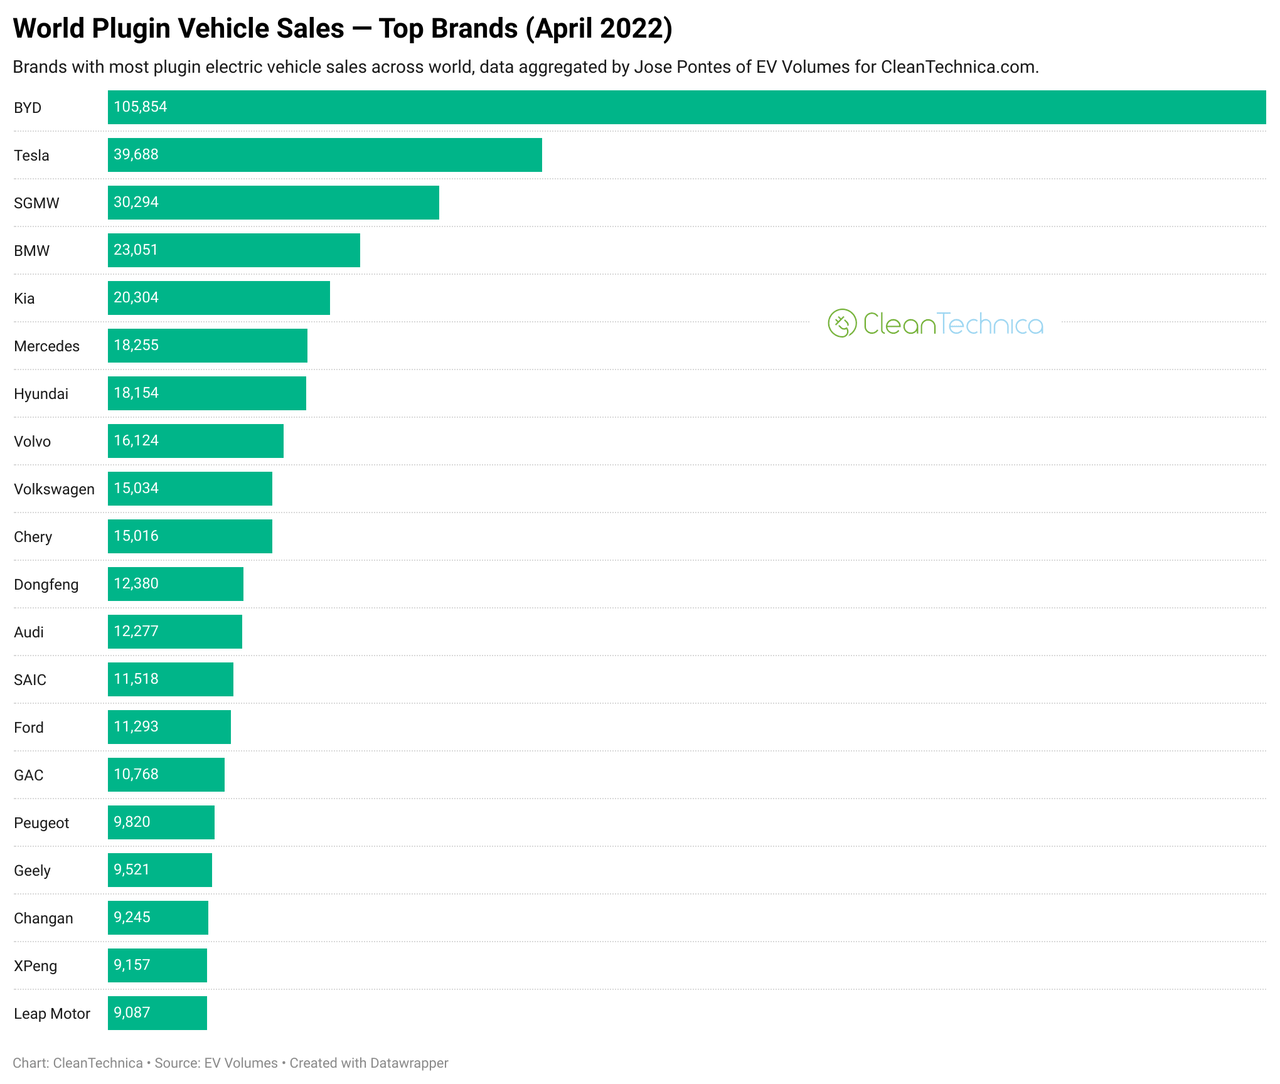 Global plugin electric car sales by brand for April 2022